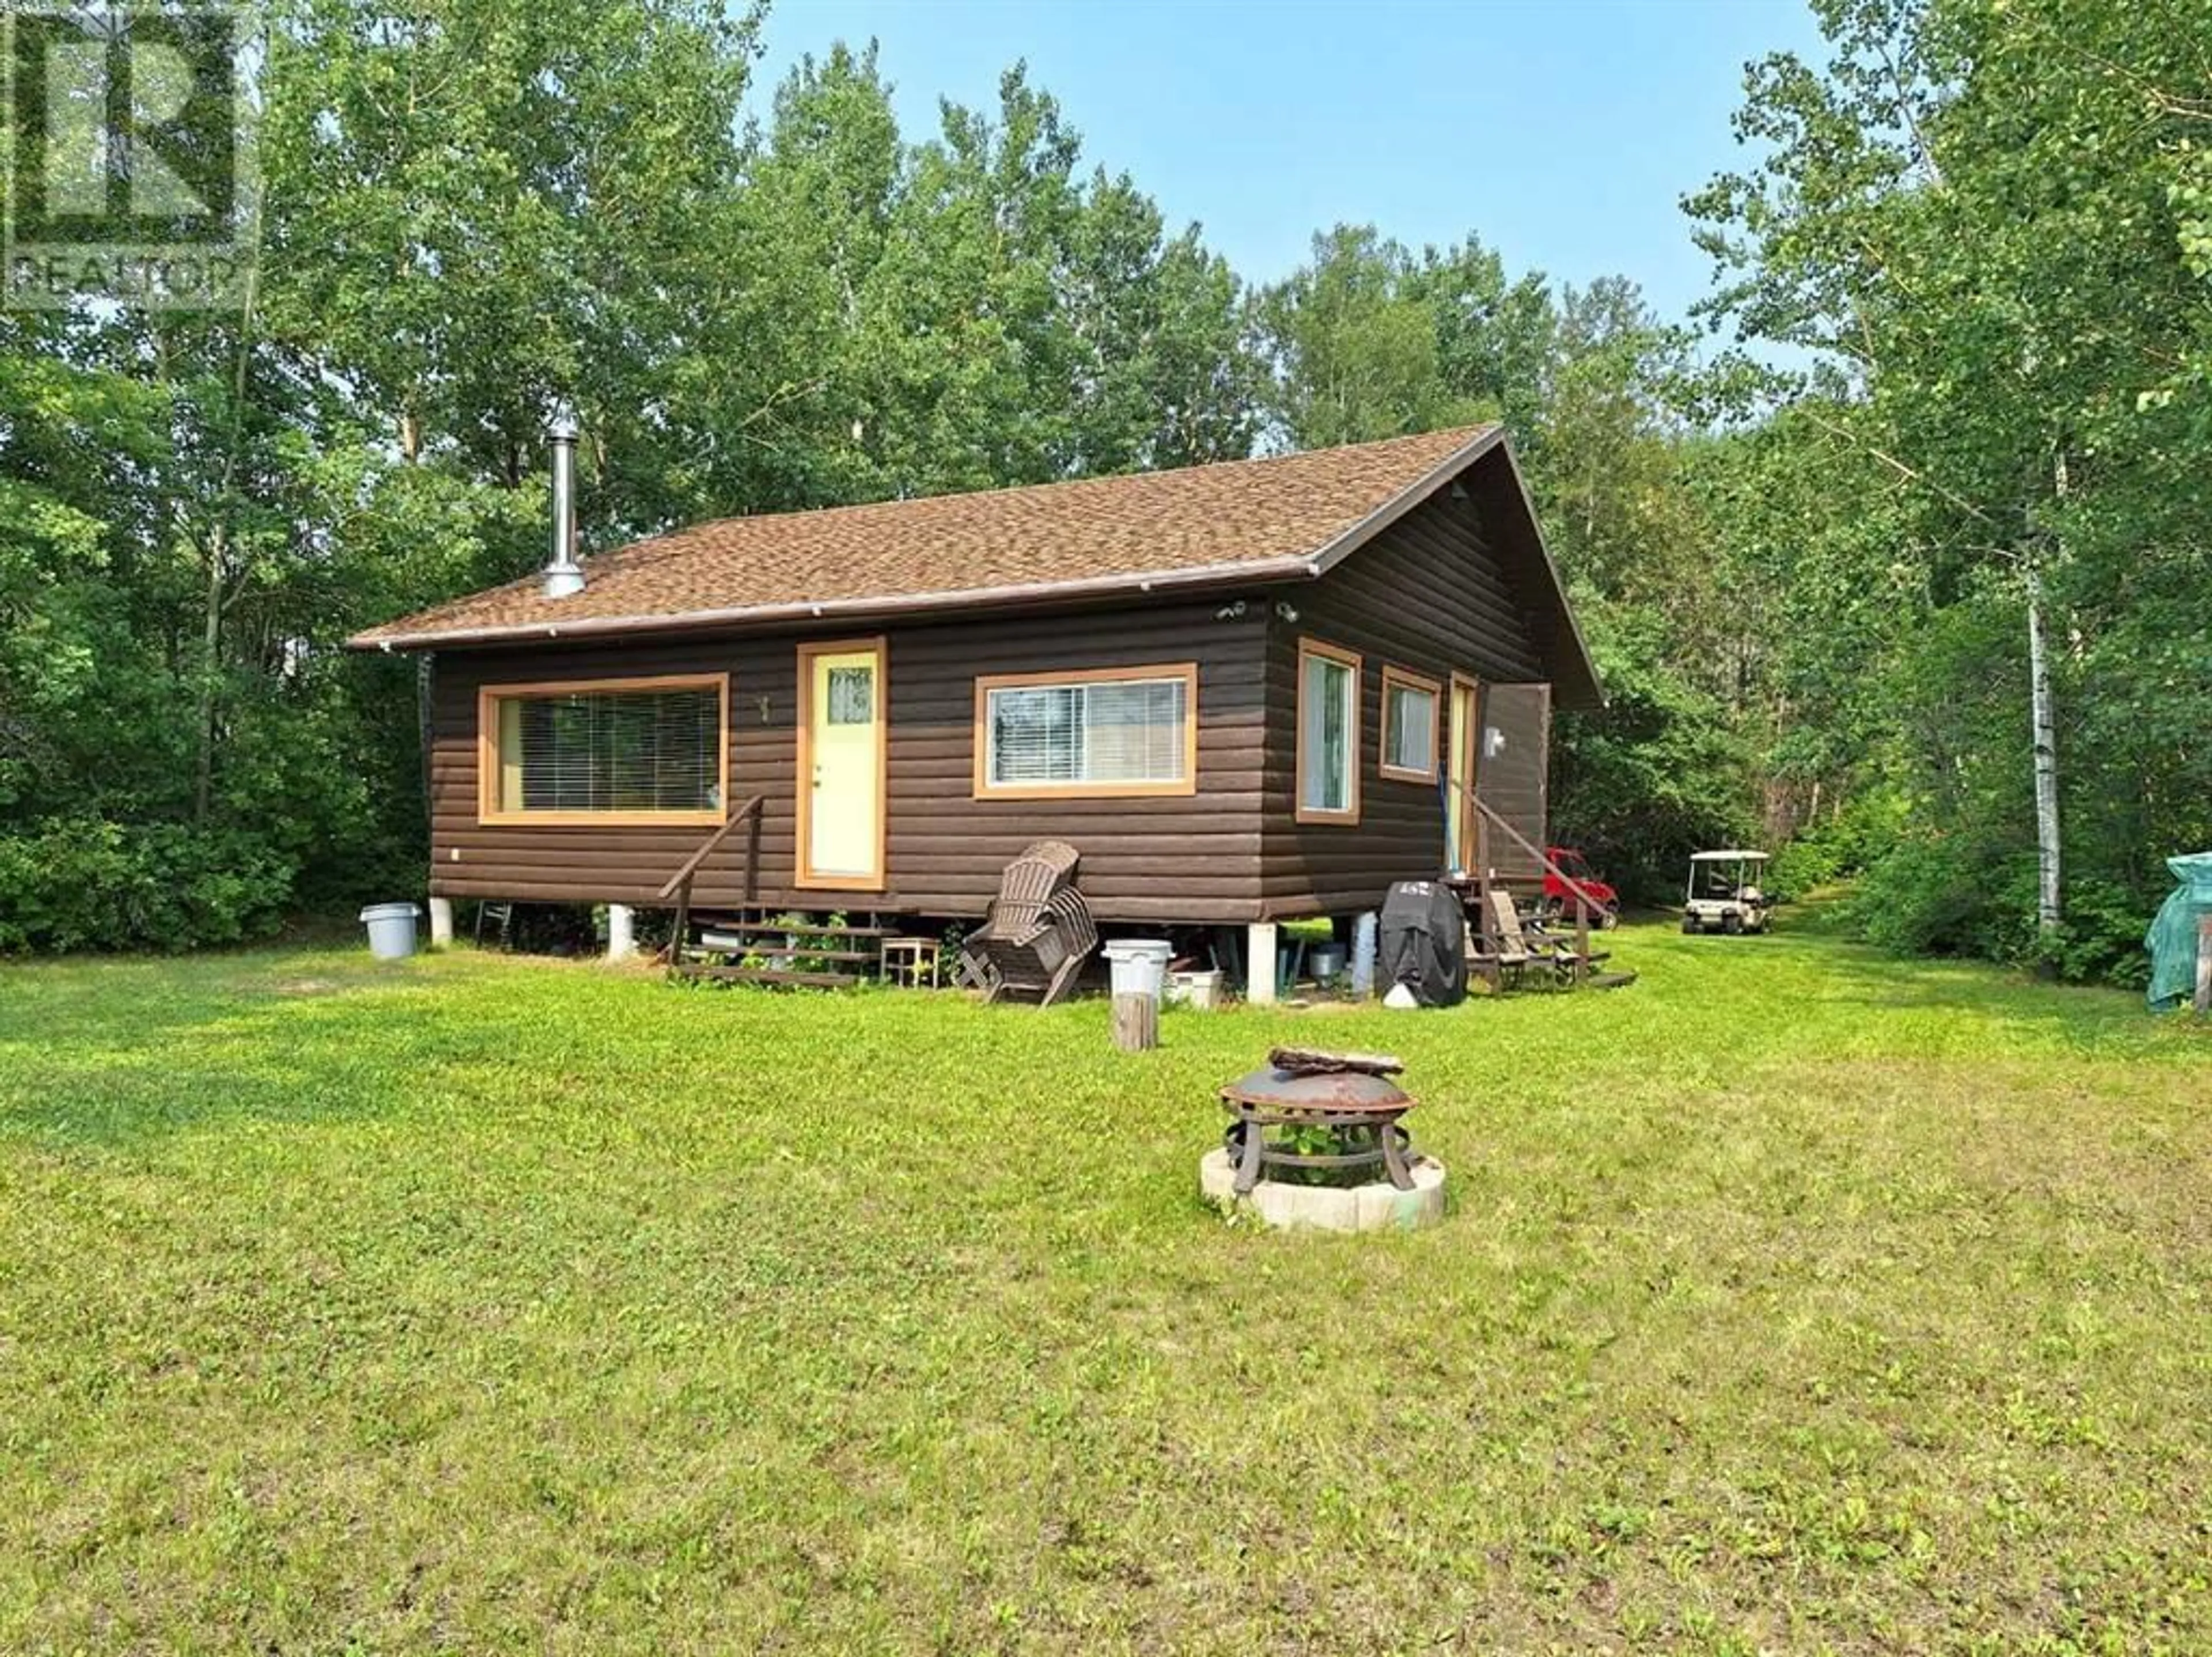 Cottage for 174 13221 Twp Rd 680 ( Golden Sands), Rural Lac La Biche County Alberta T0A2C1